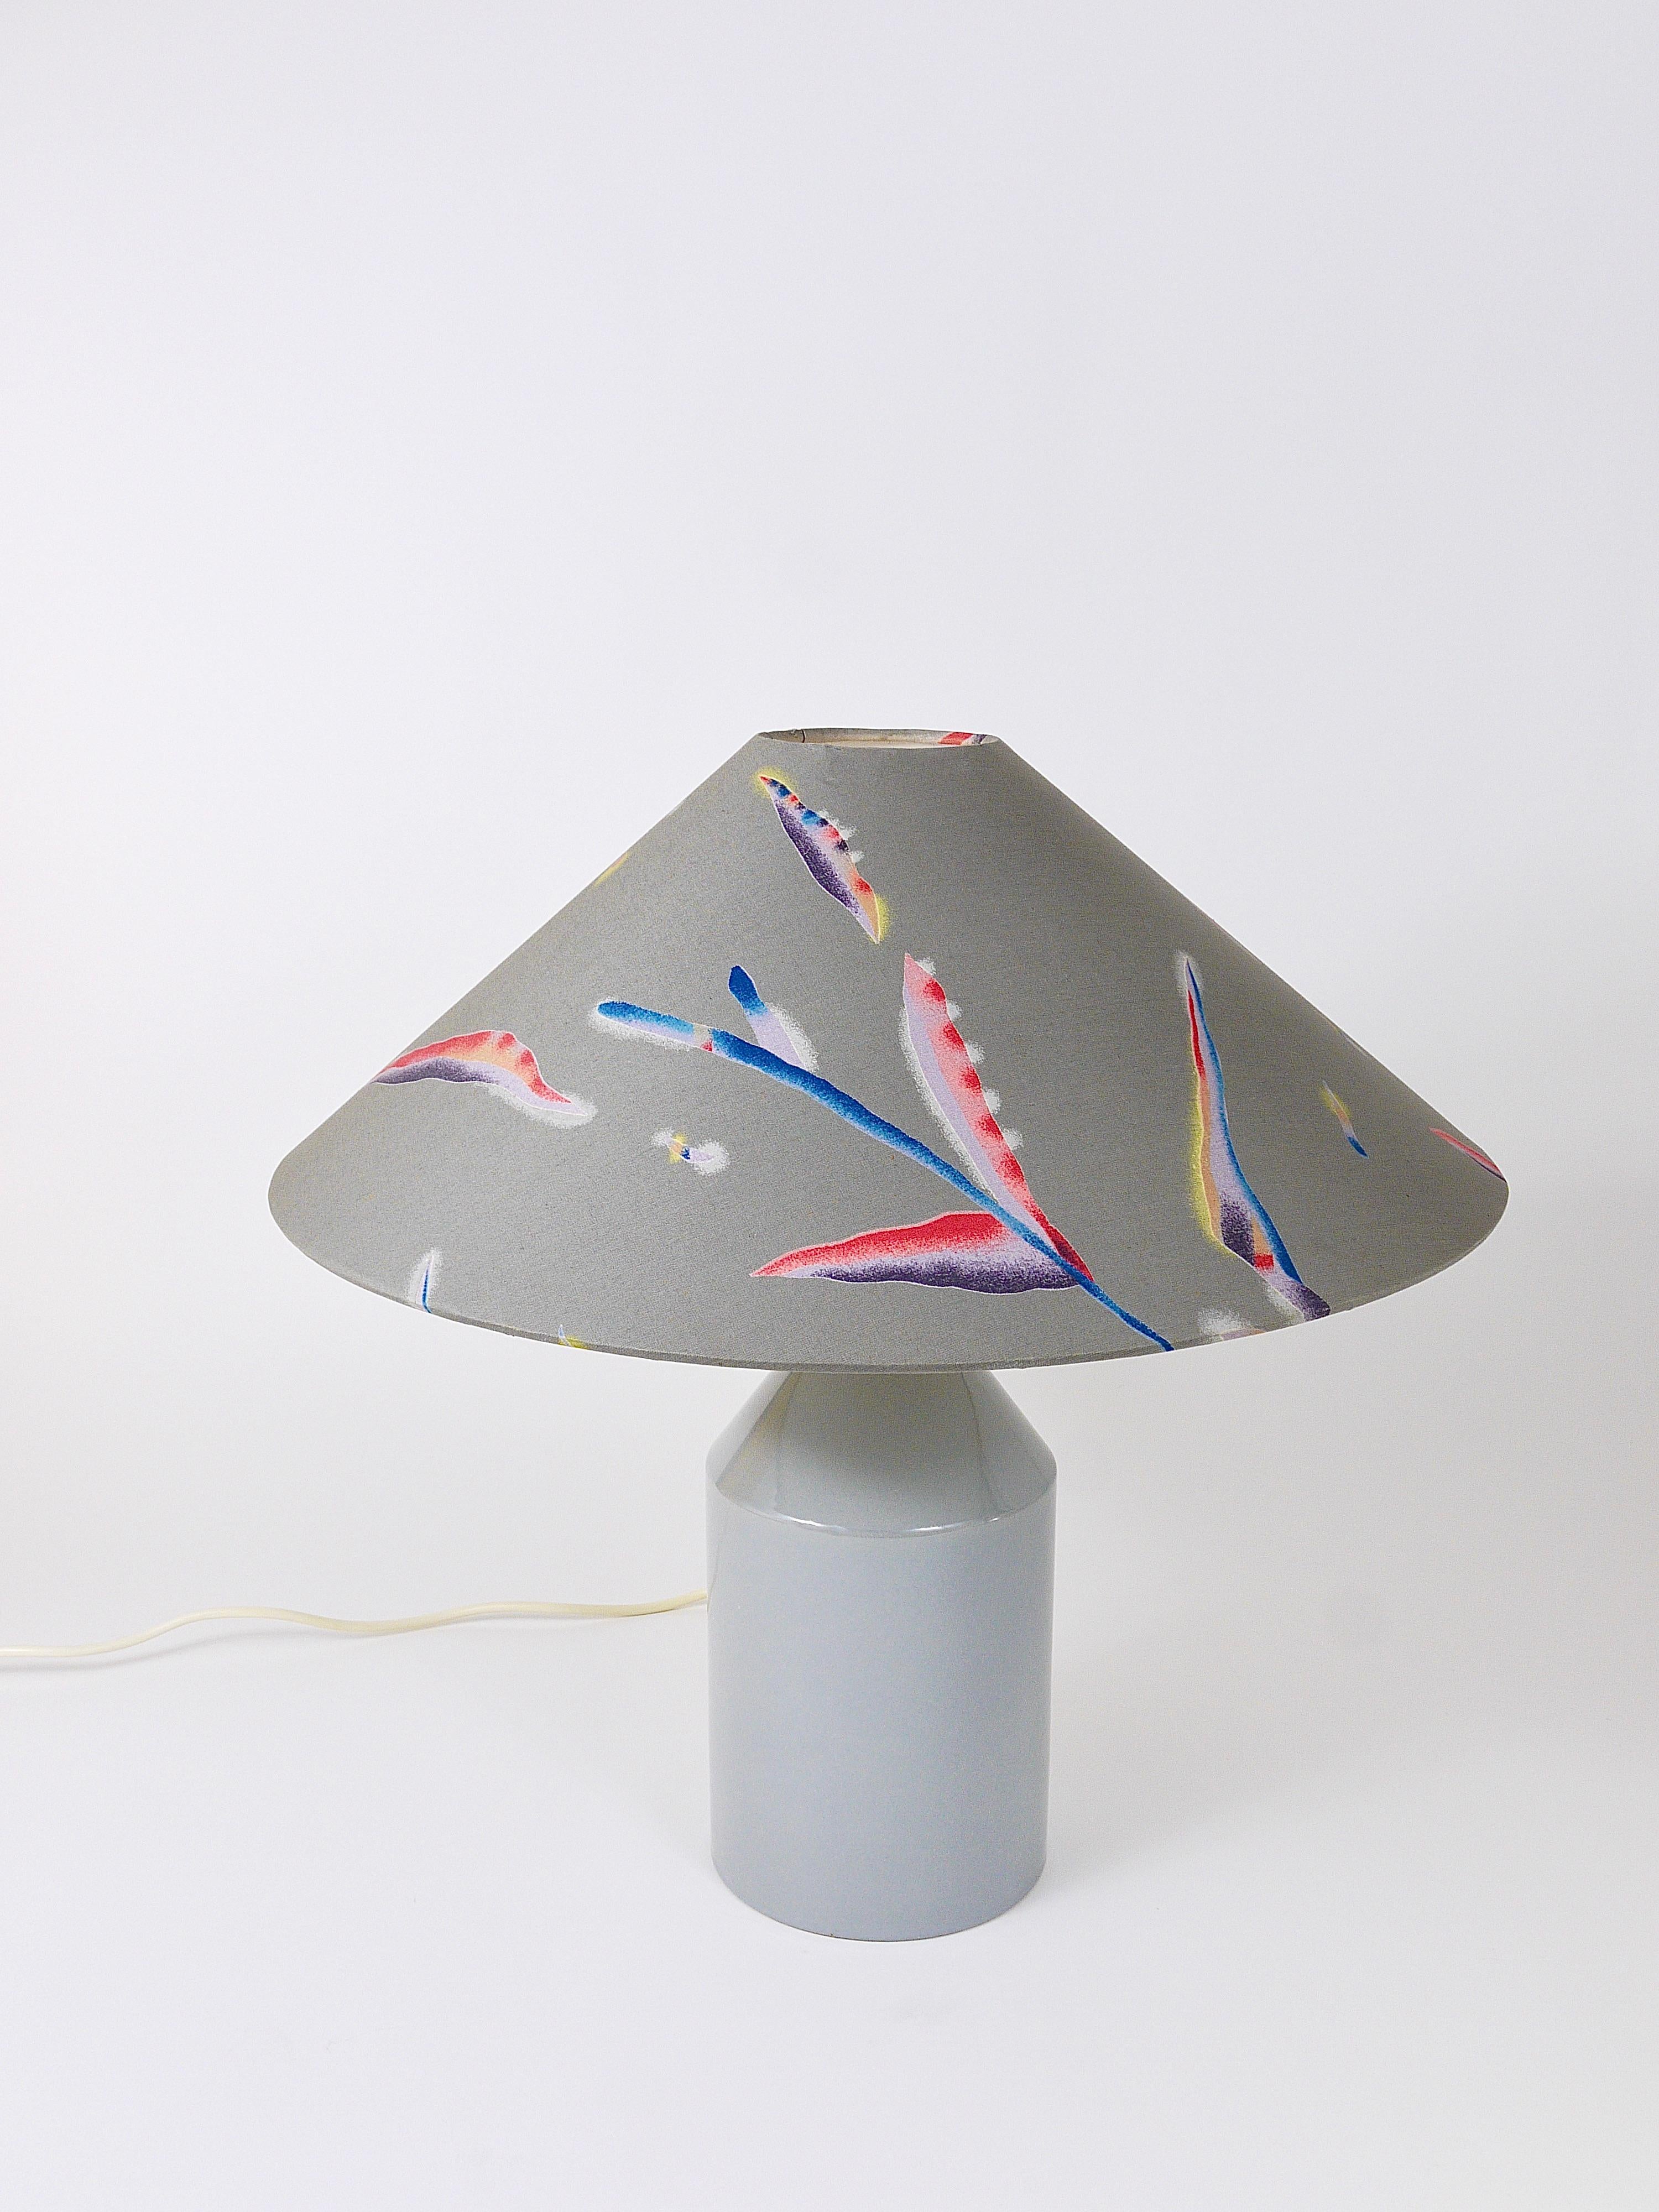 Colorful Post-Modern Table Lamp, Italy, 1980s For Sale 5